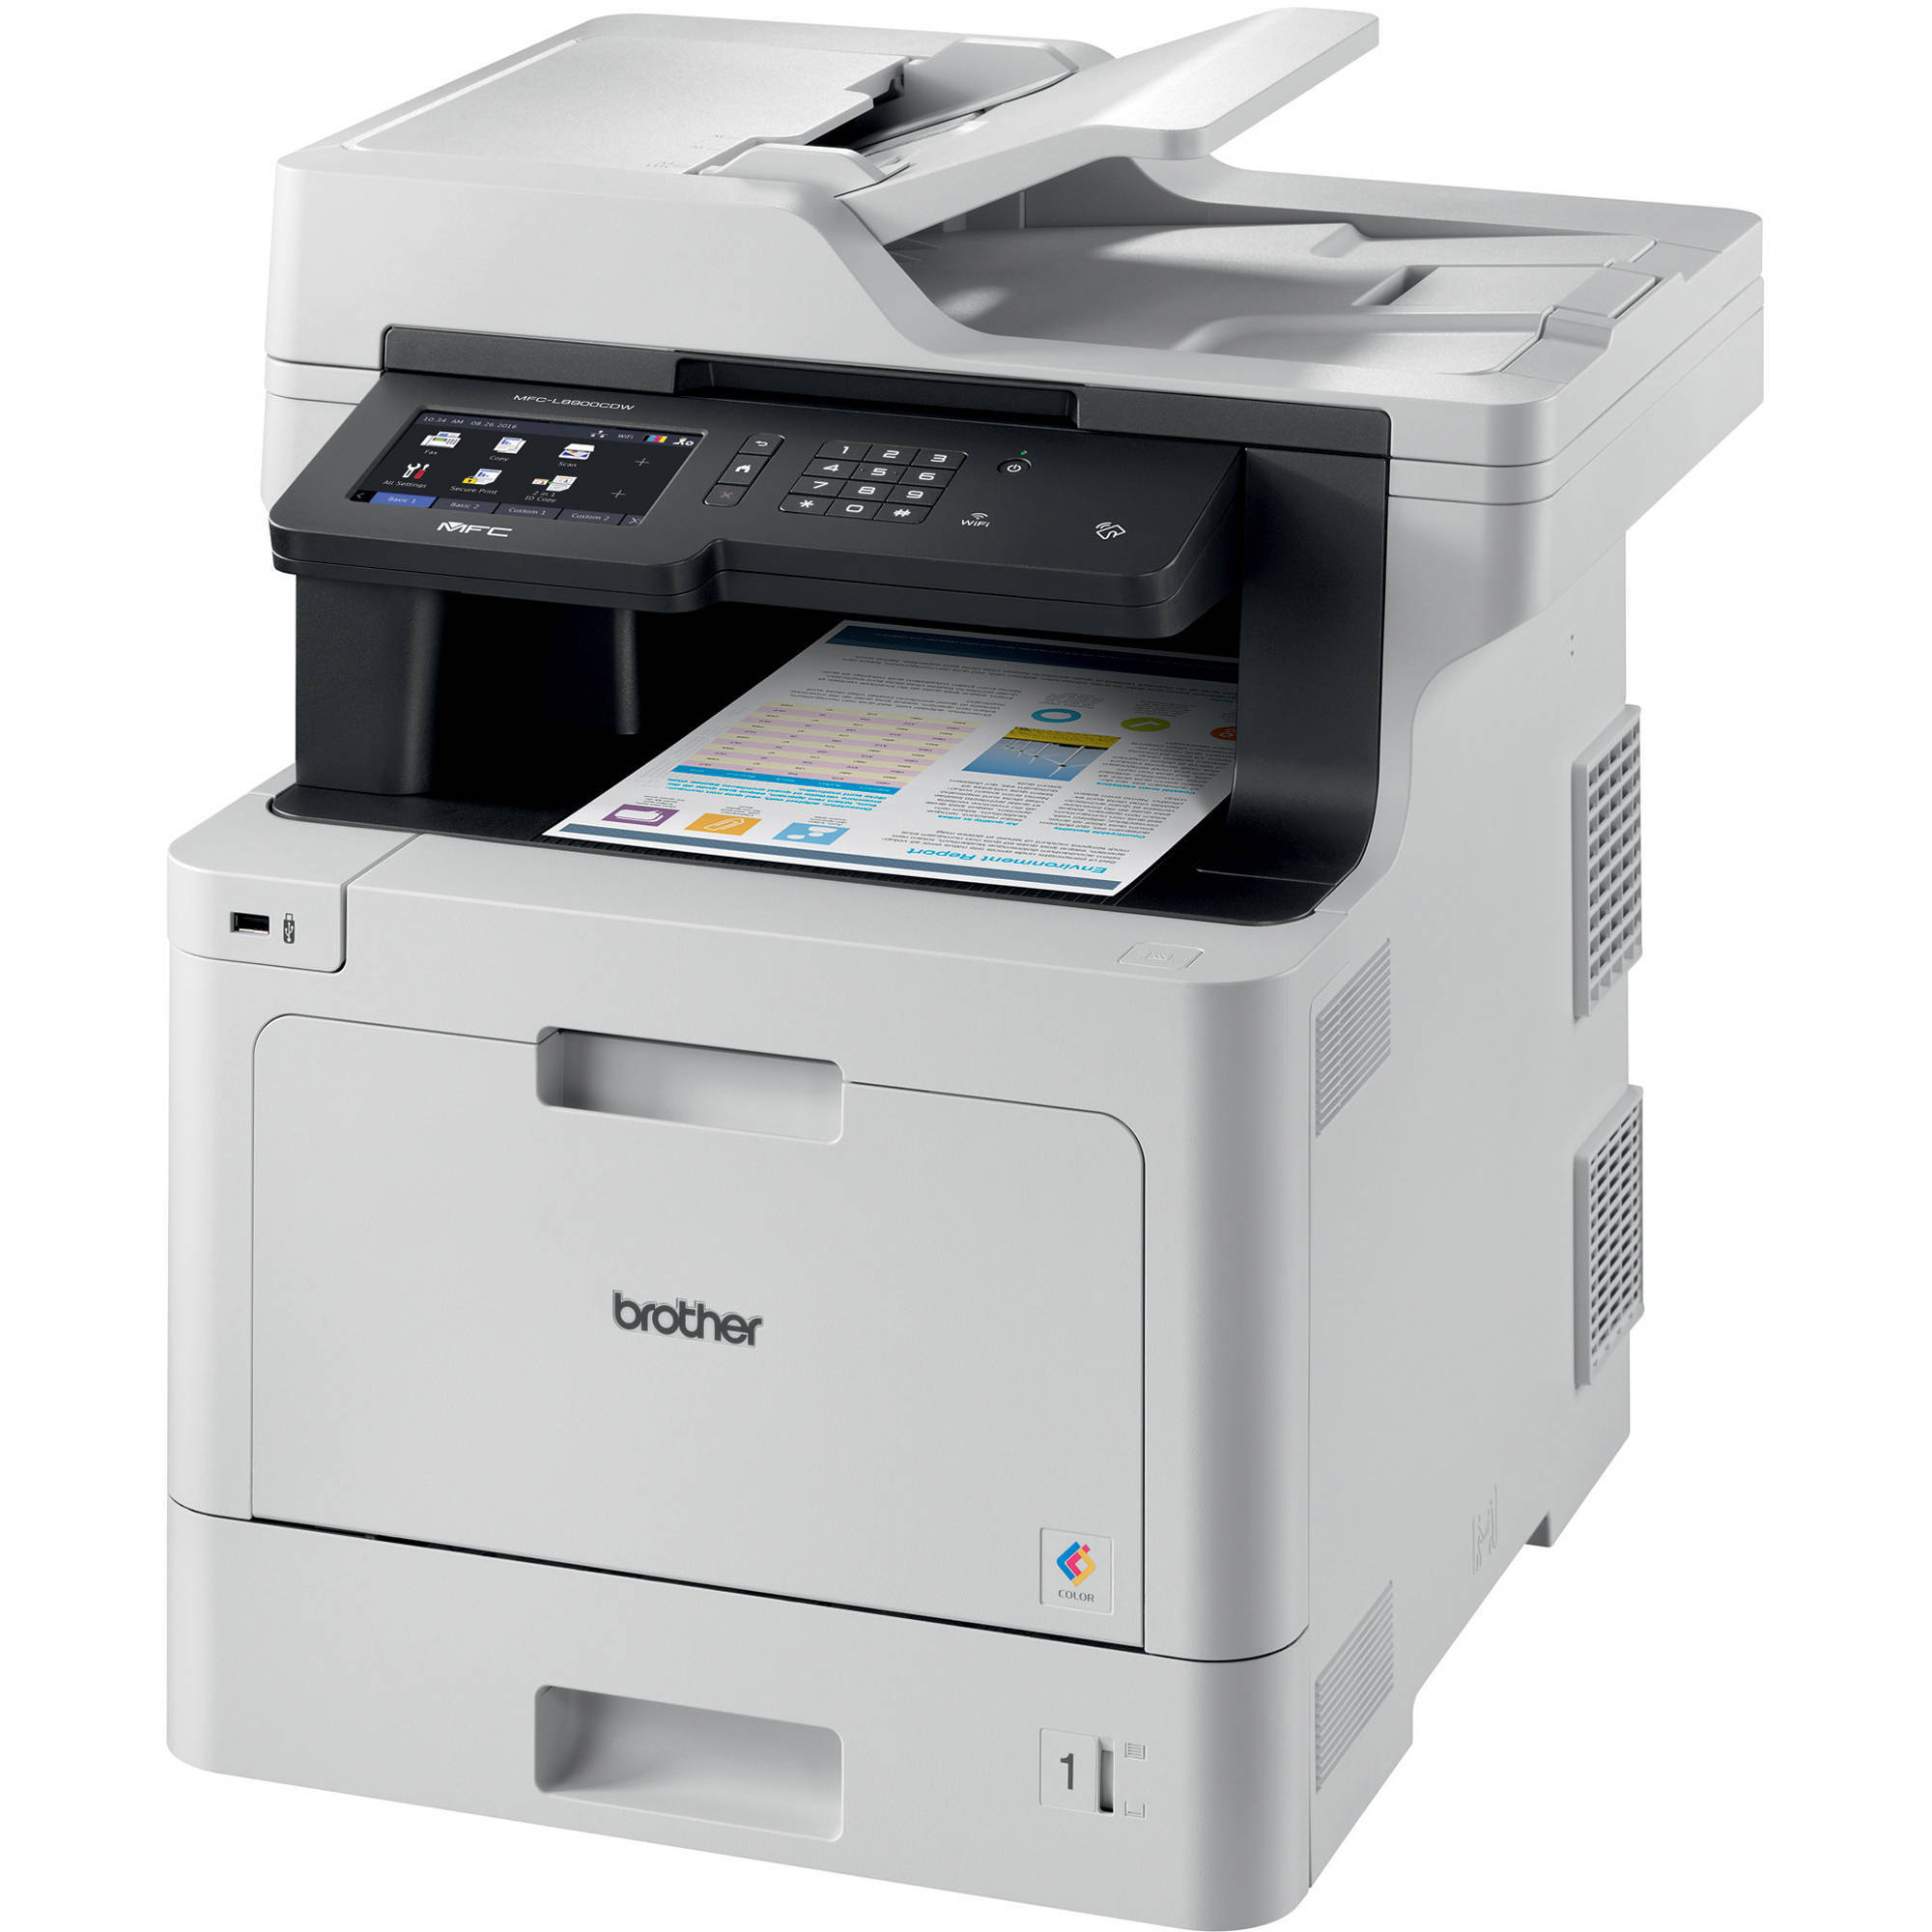 Brother MFC-L8900CDW Review - A Great Business Multifunction Printer